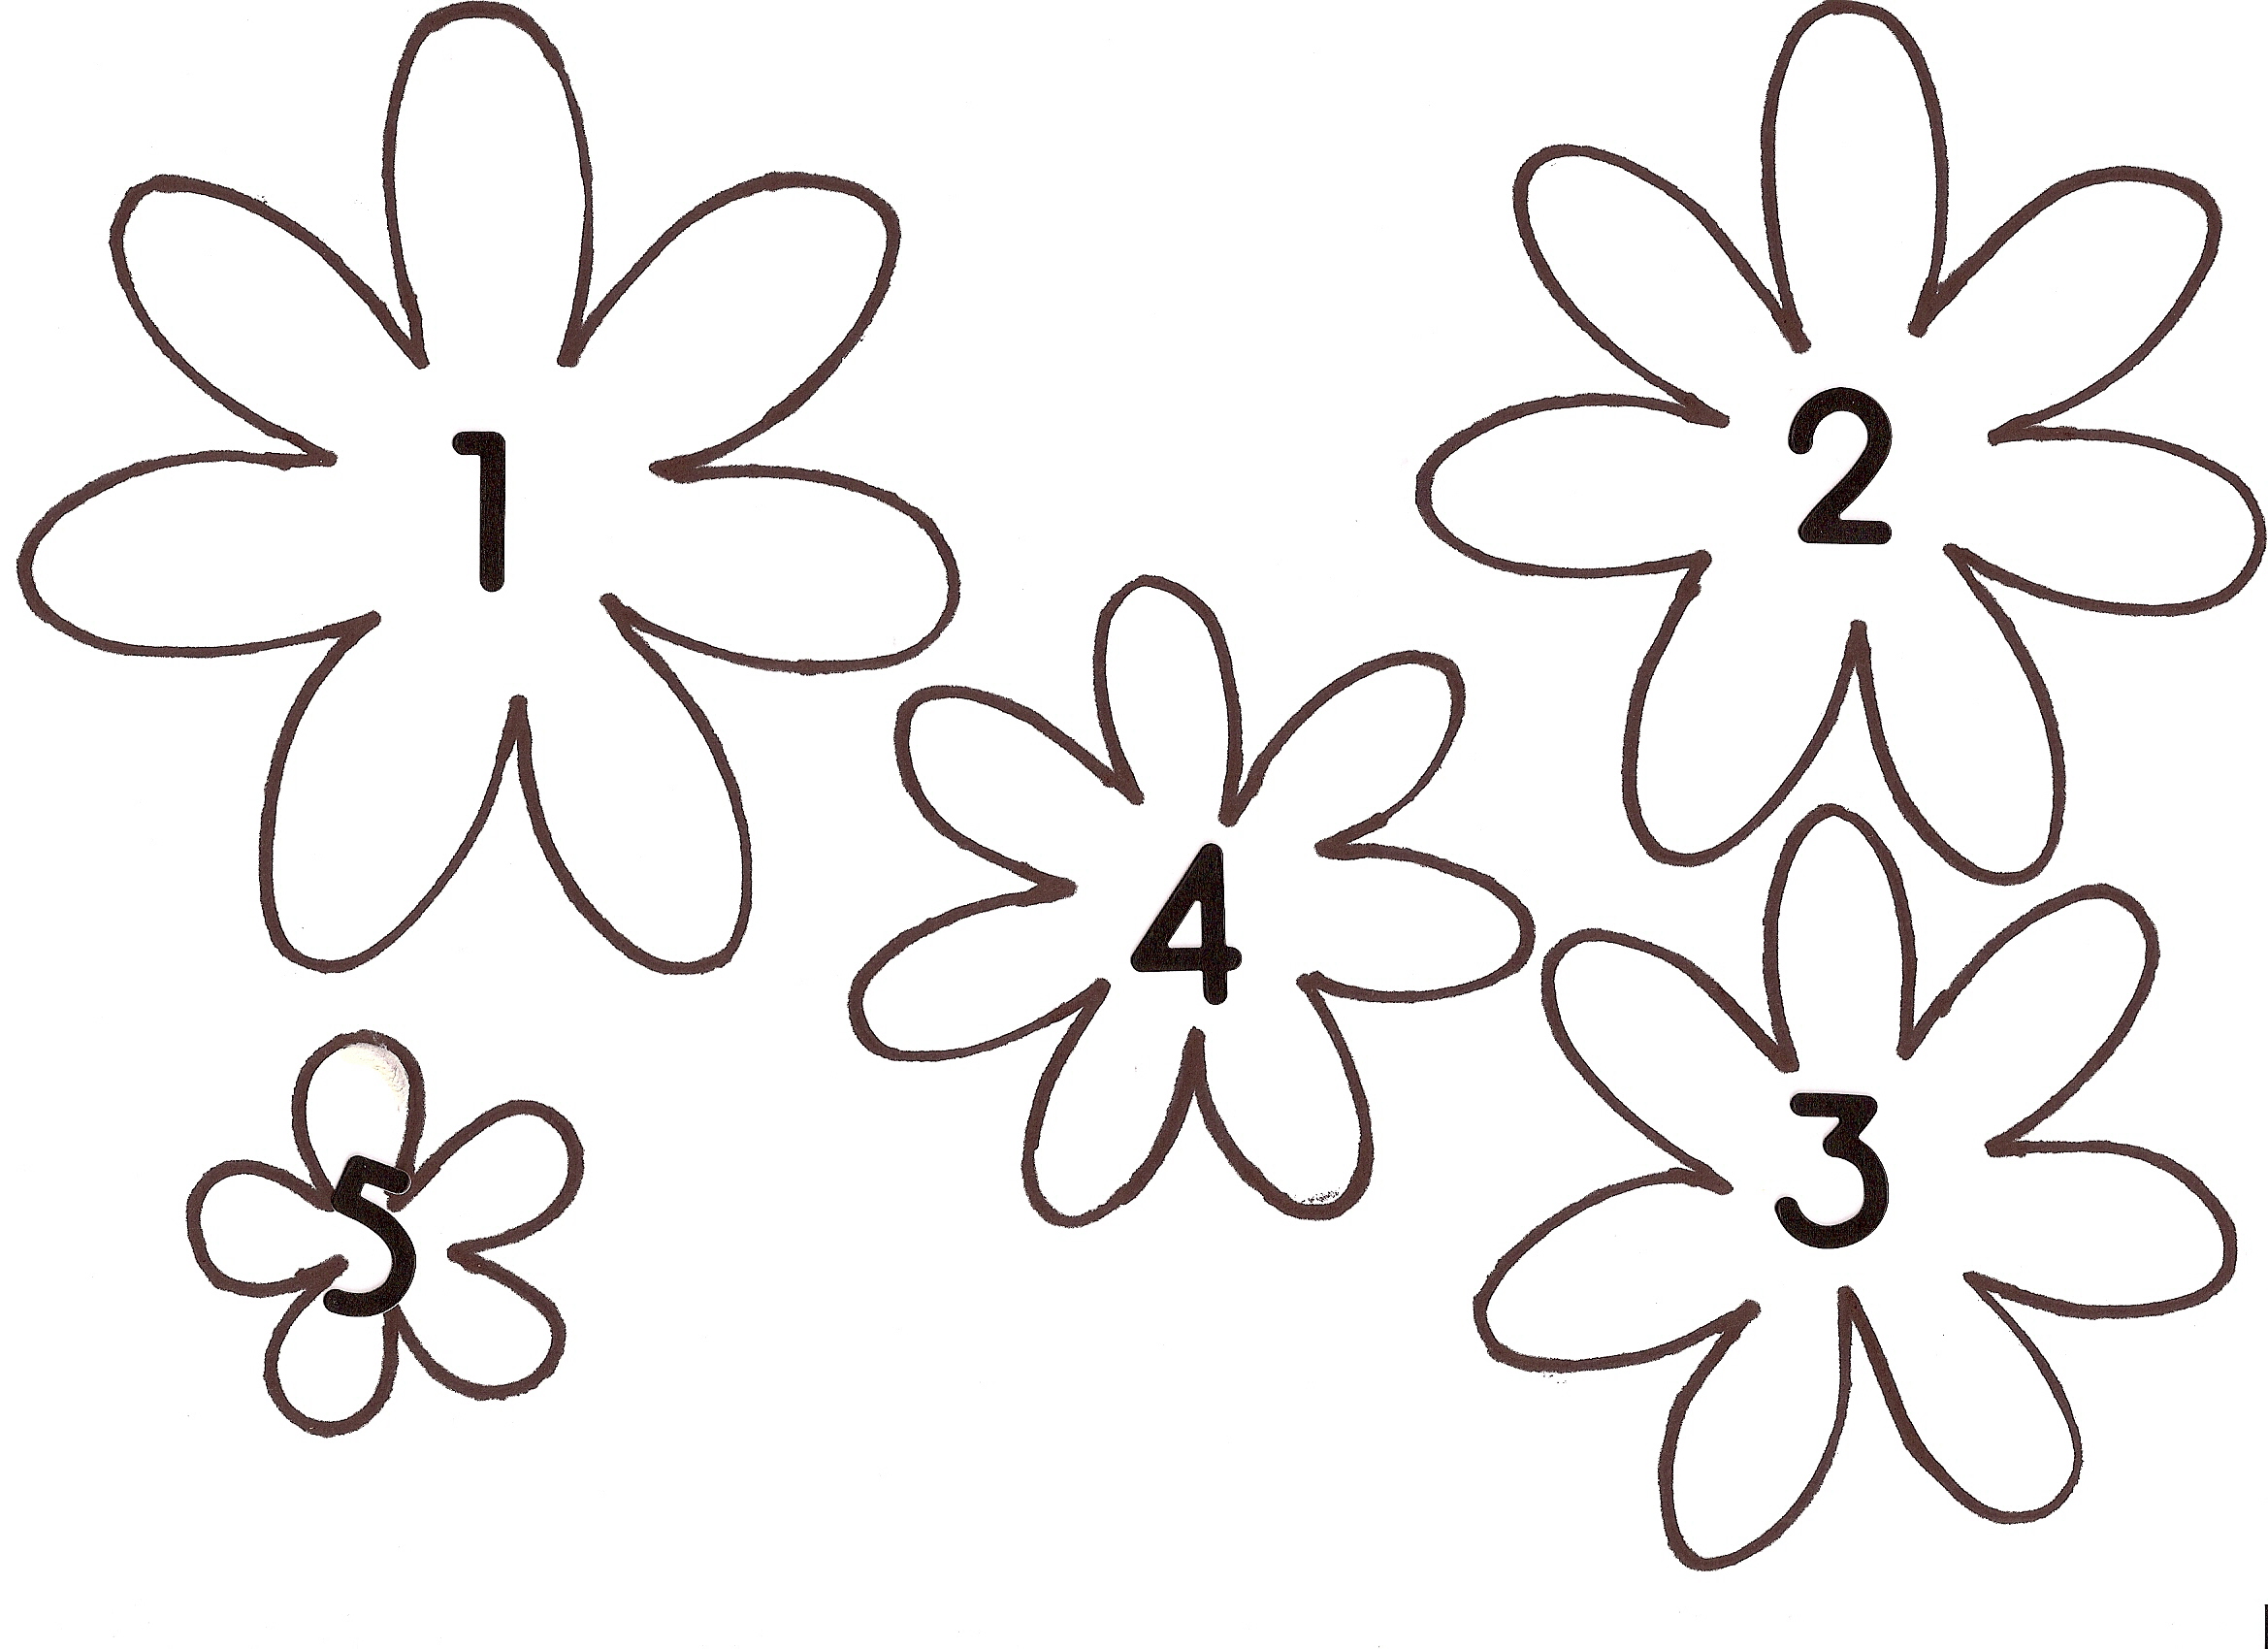 Flower templates | paperpestogallery